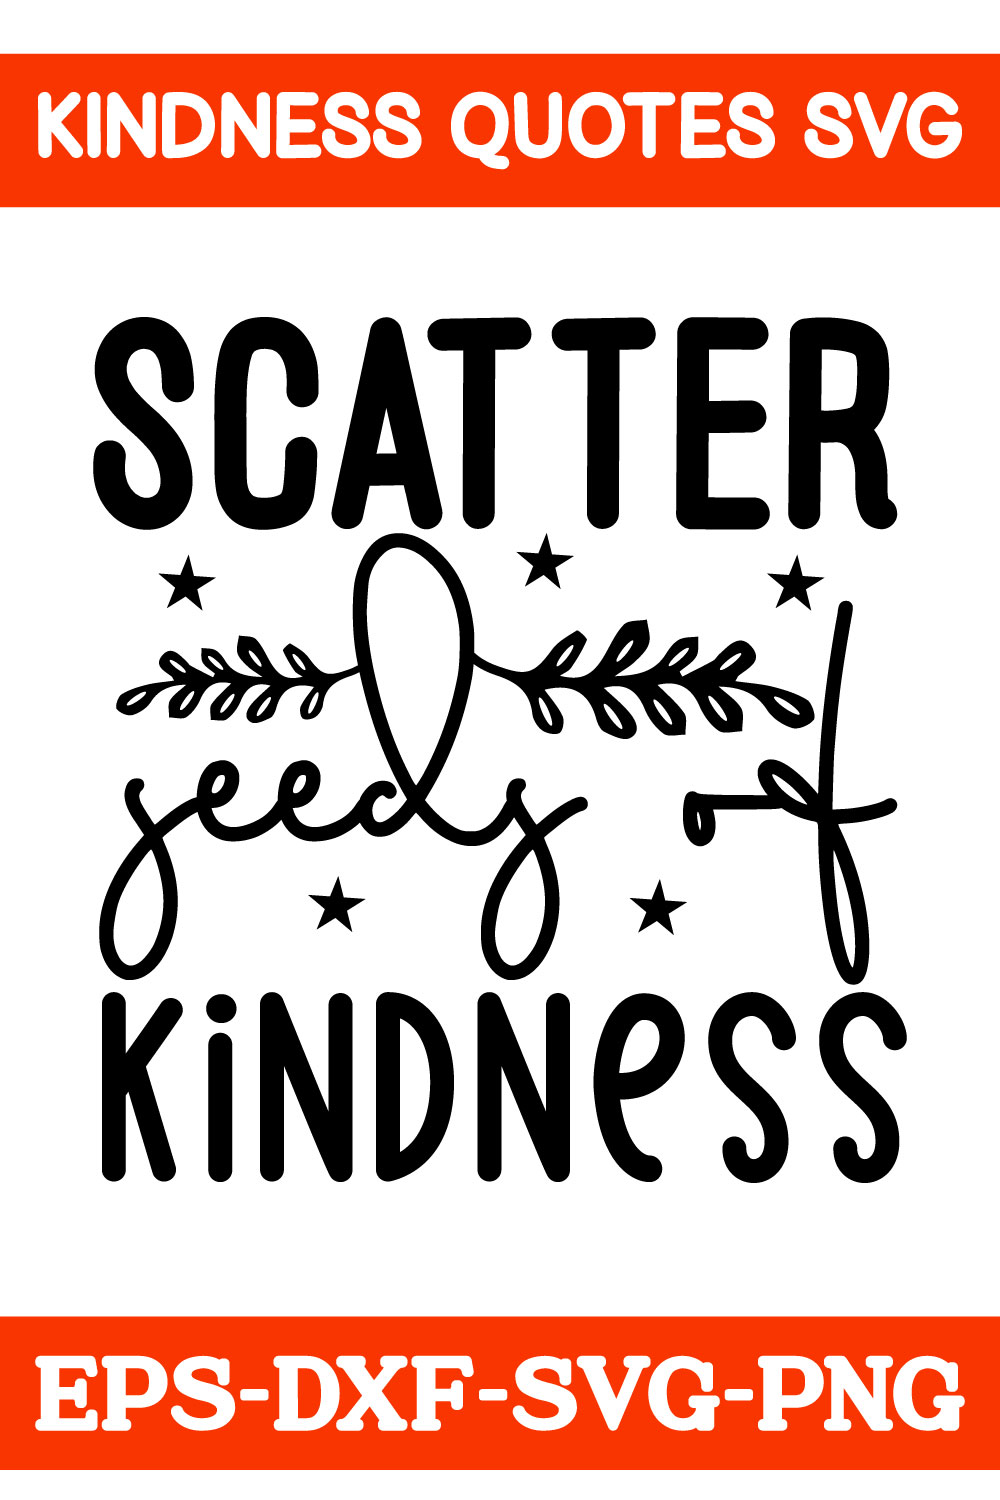 Kindness Quotes Svg pinterest preview image.